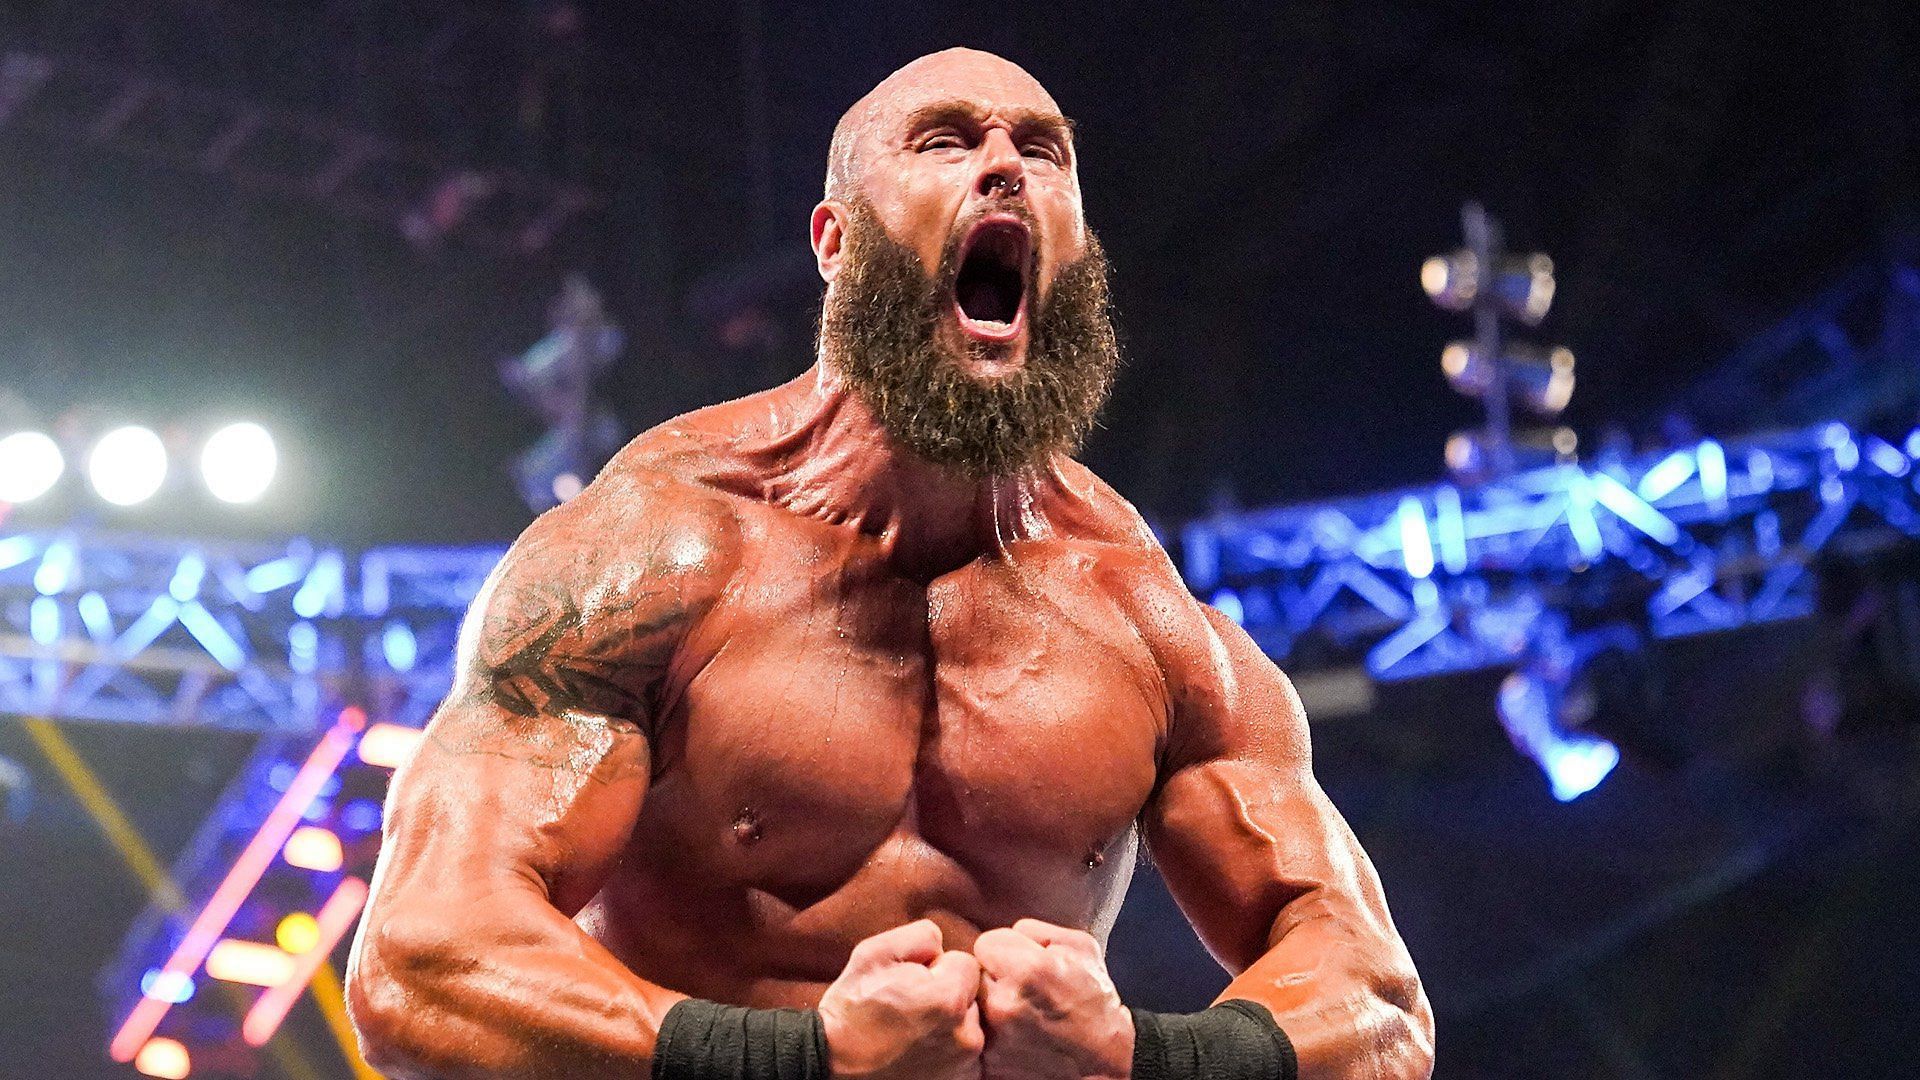 Braun Strowman poses for fans on WWE SmackDown